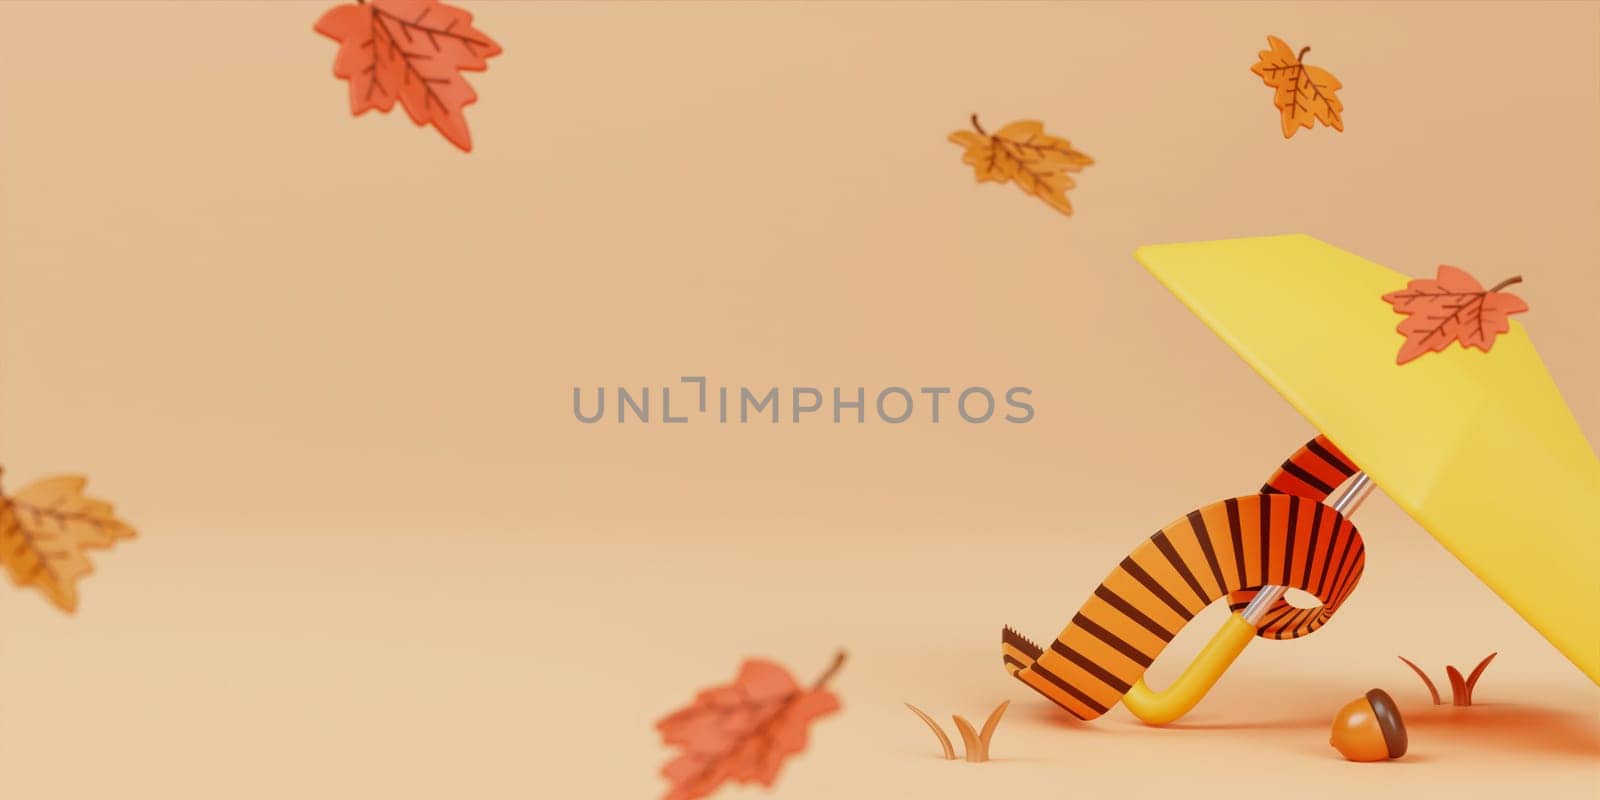 Autumn sale decoration background with scarf, umbellar, leaves, copy space text, 3D rendering by meepiangraphic